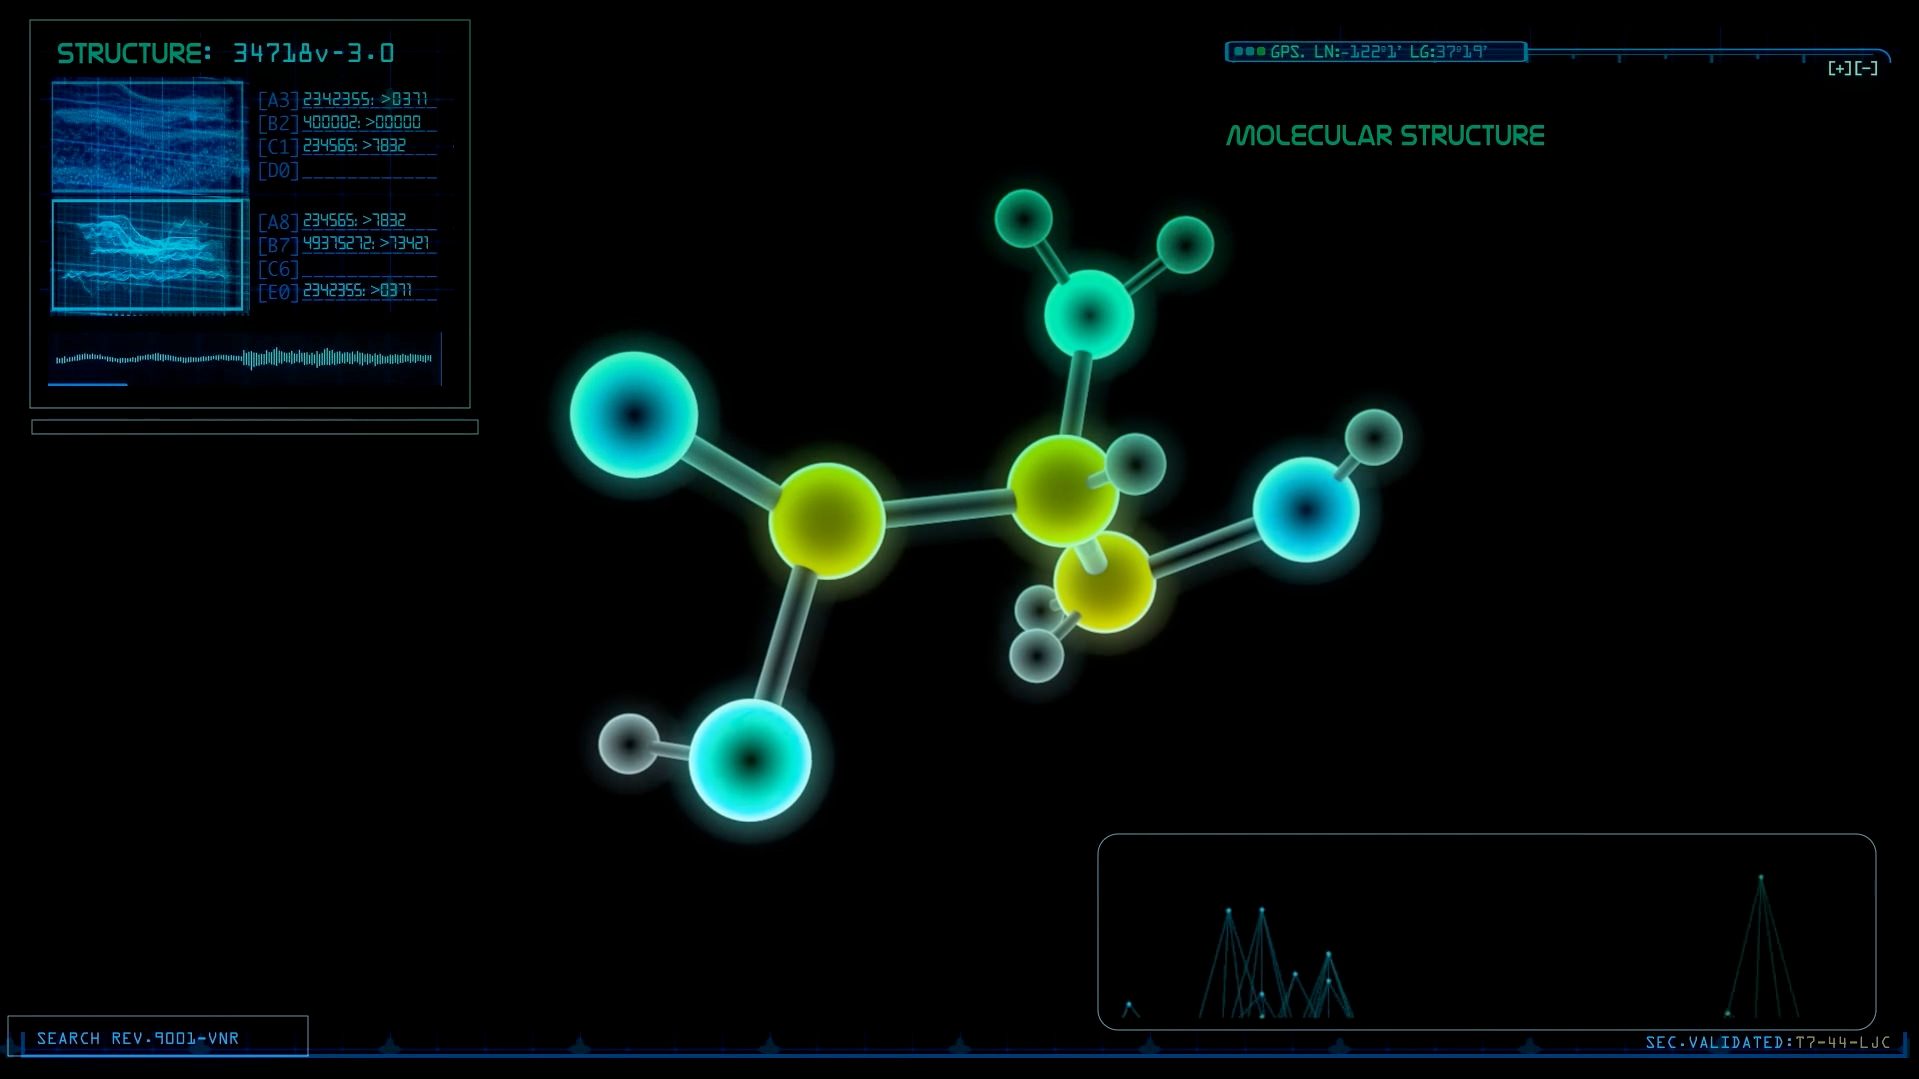 This image shows software for proteomics research focussing on a molecular structure